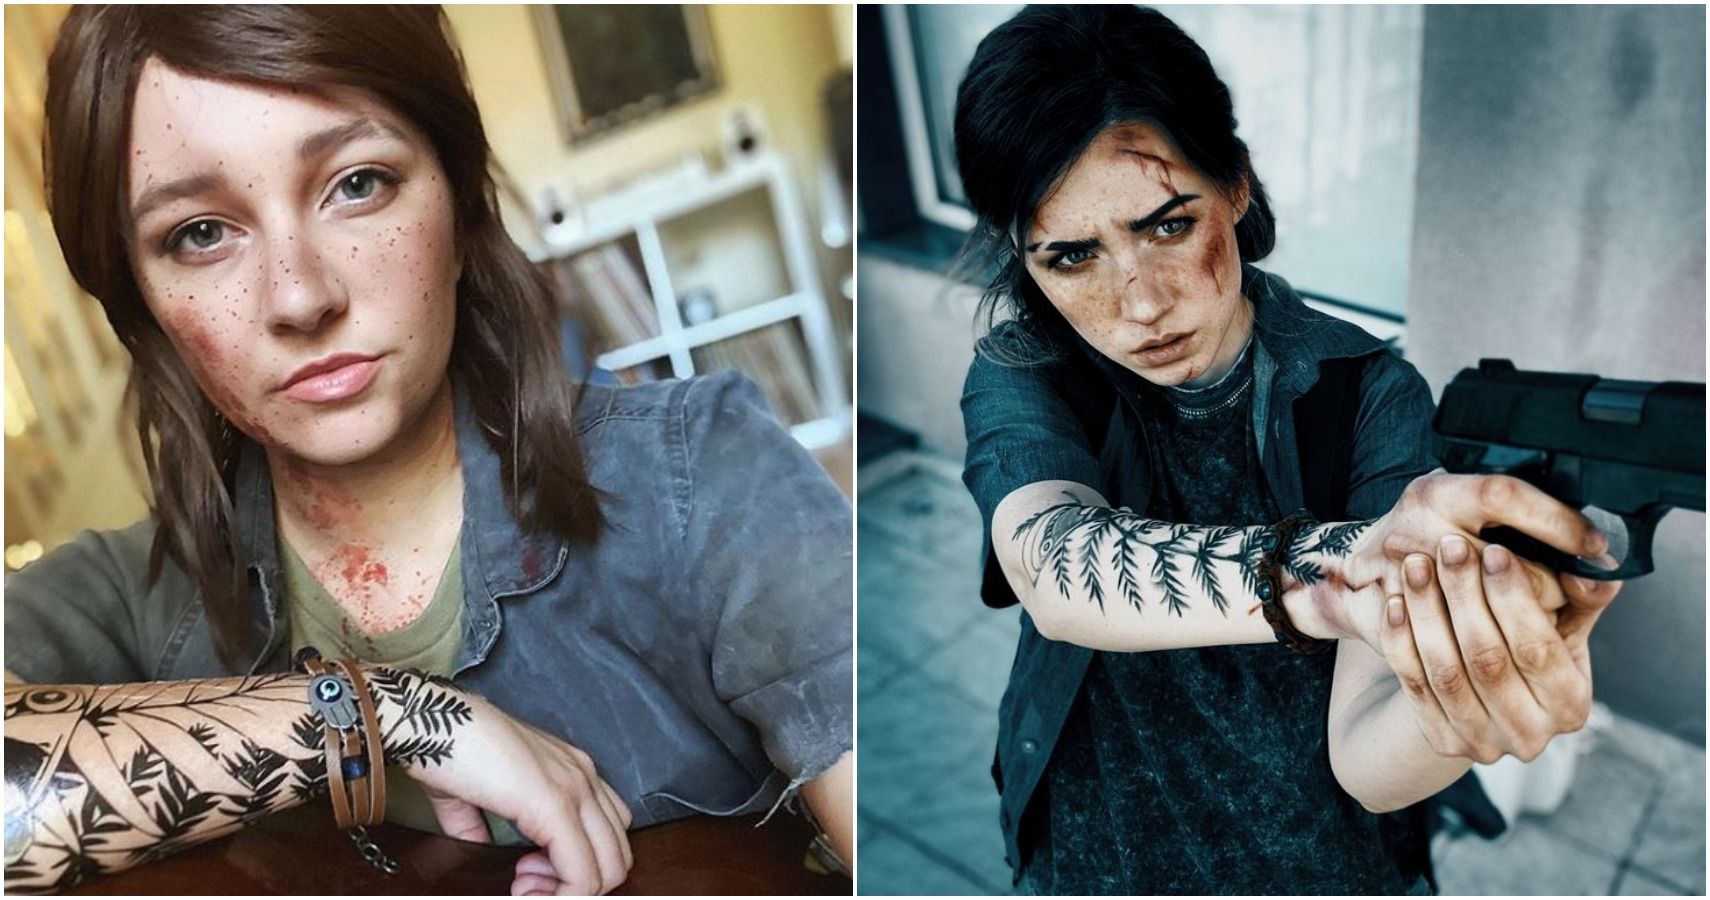 My friend did a cosplay of Ellie from The Last of Us 2